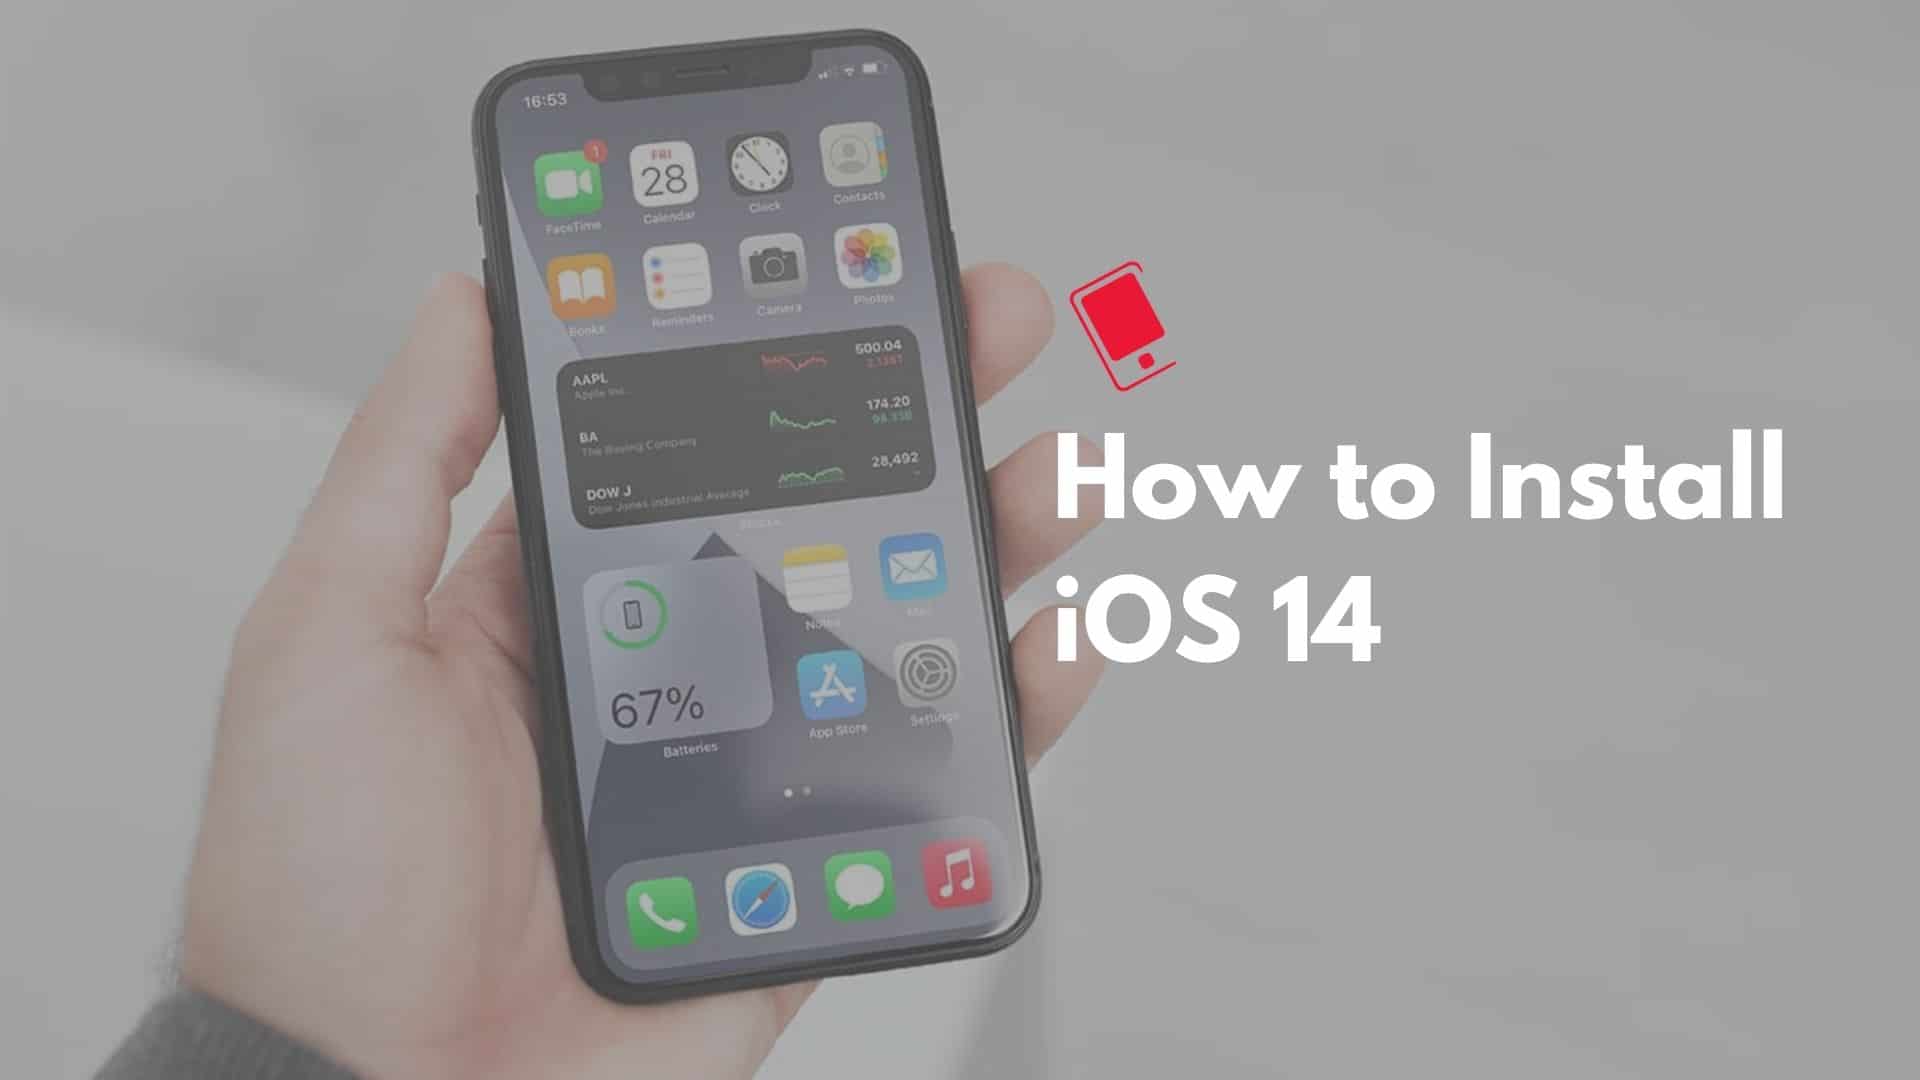 How to install iOS 14 on iPhone